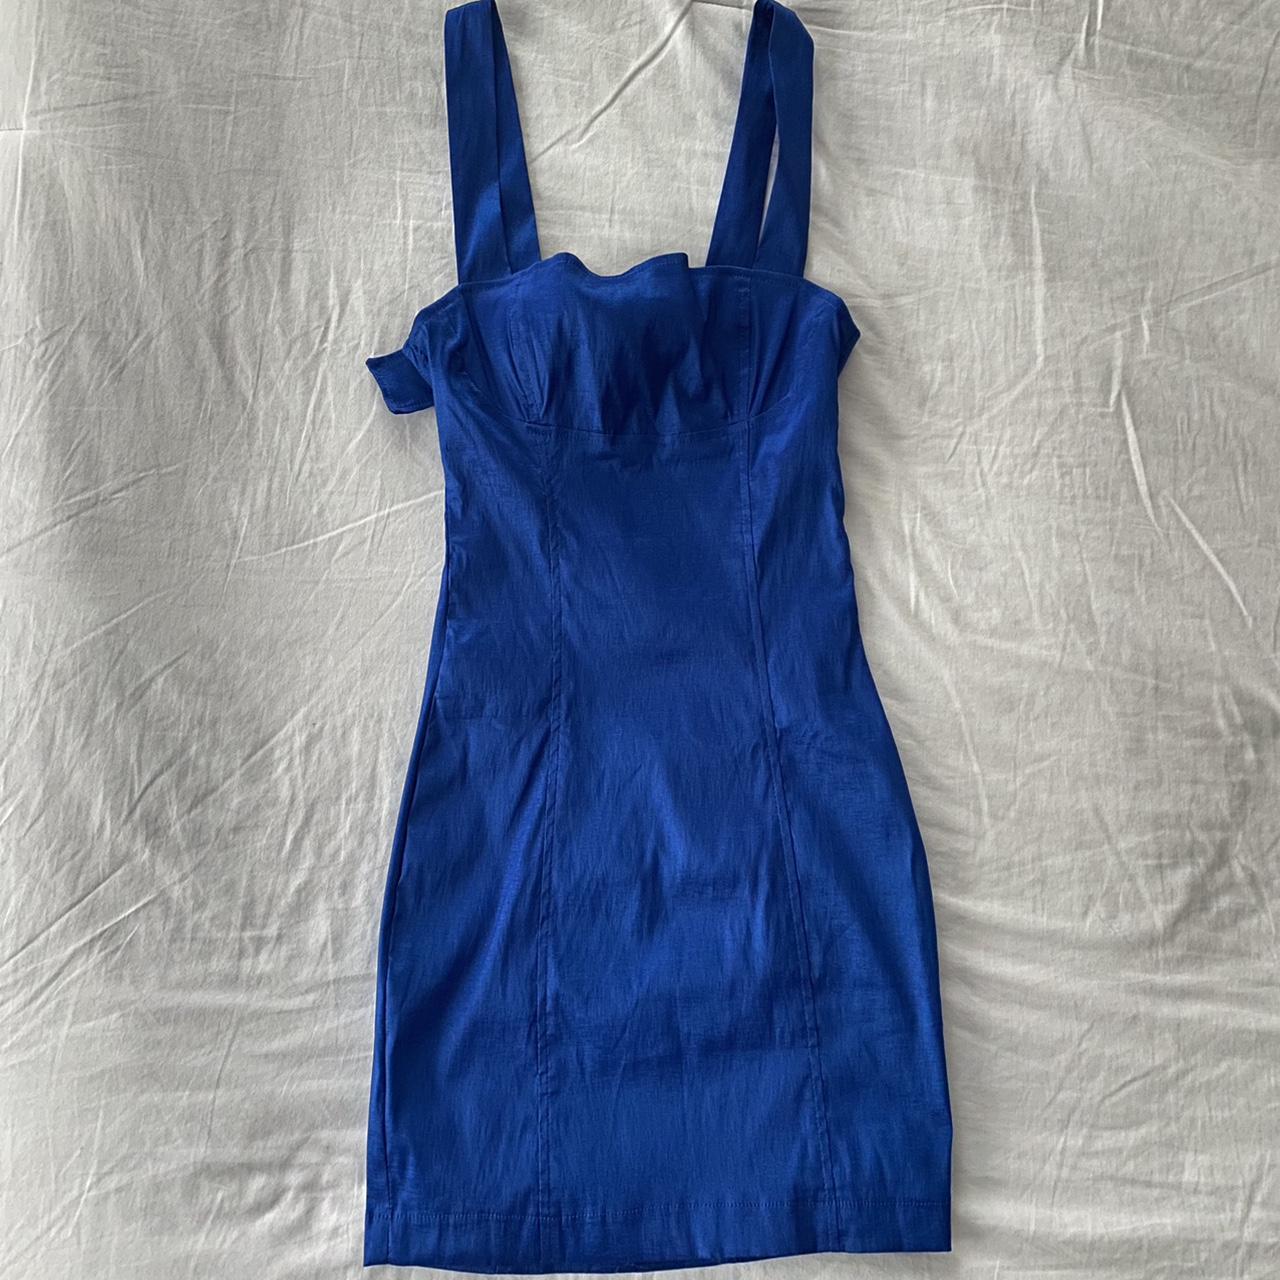 LUCY IN THE SKY ROYAL BLUE DRESS FREE... - Depop